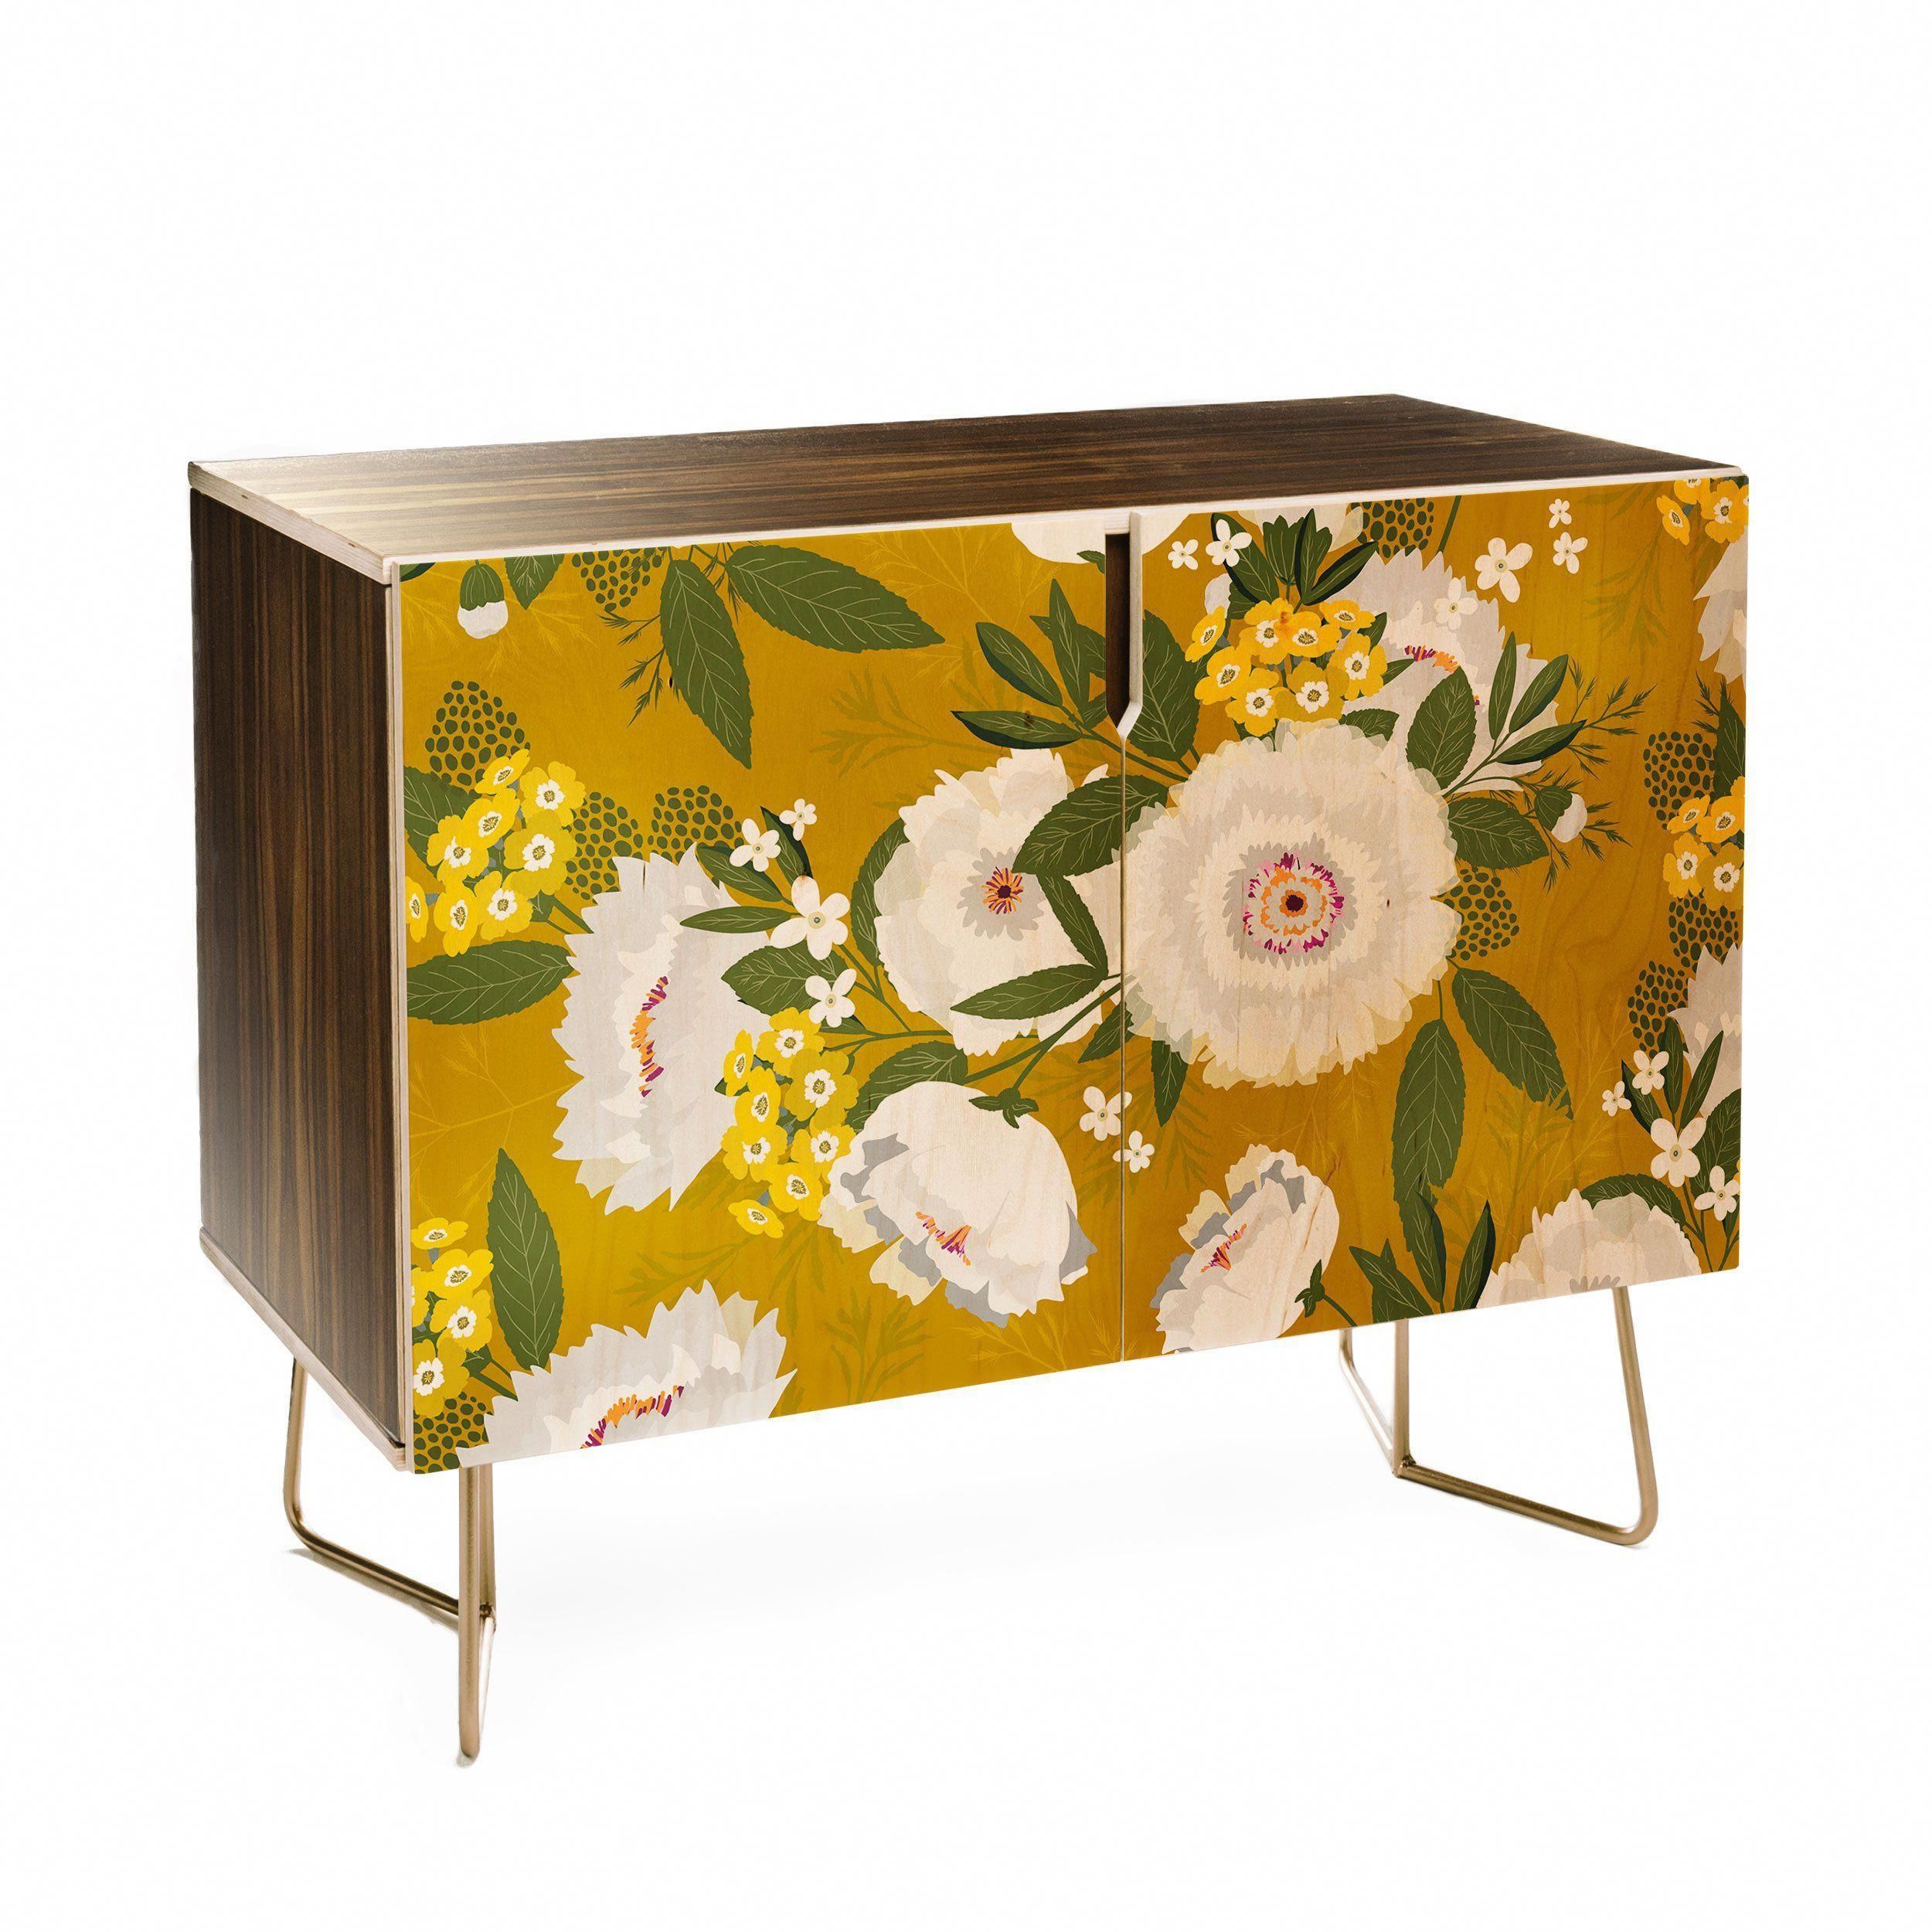 Fleurette Midday Credenza Iveta Abolina In Floral Blush Yellow Credenzas (View 8 of 30)